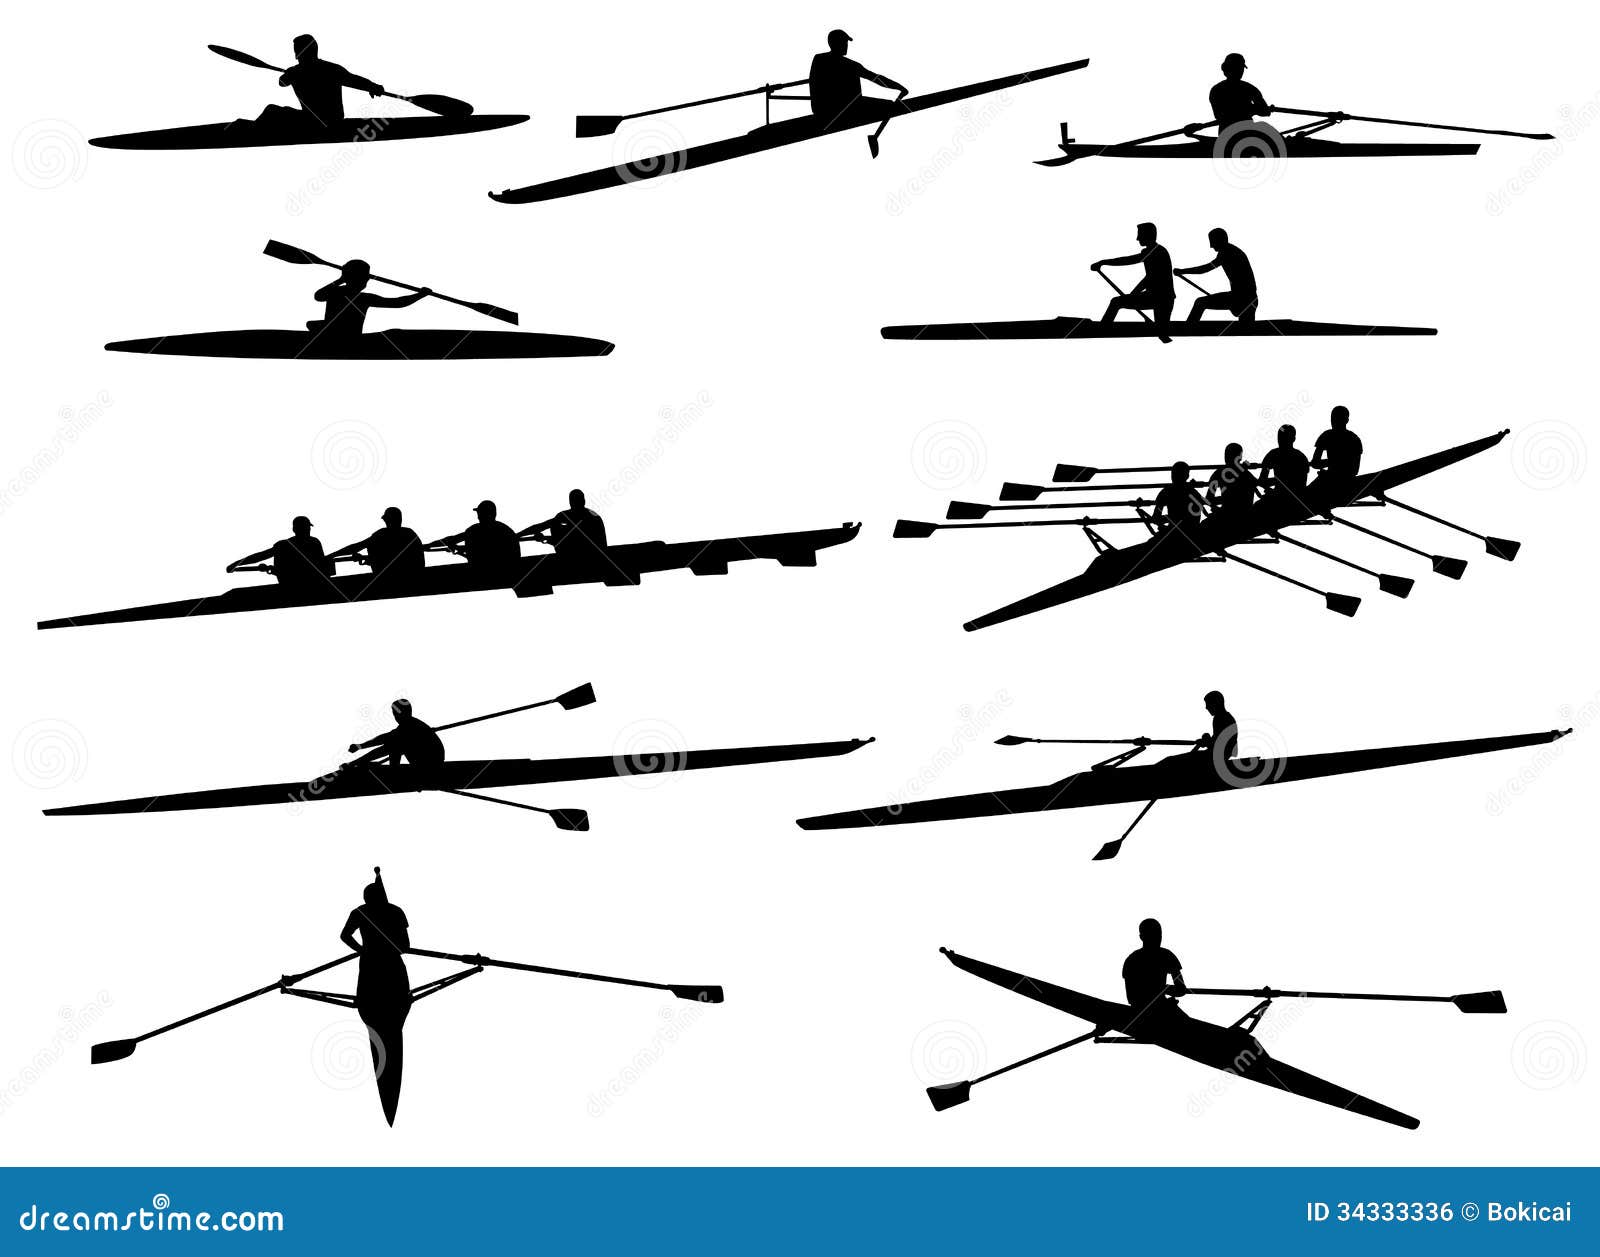 rowing silhouettes